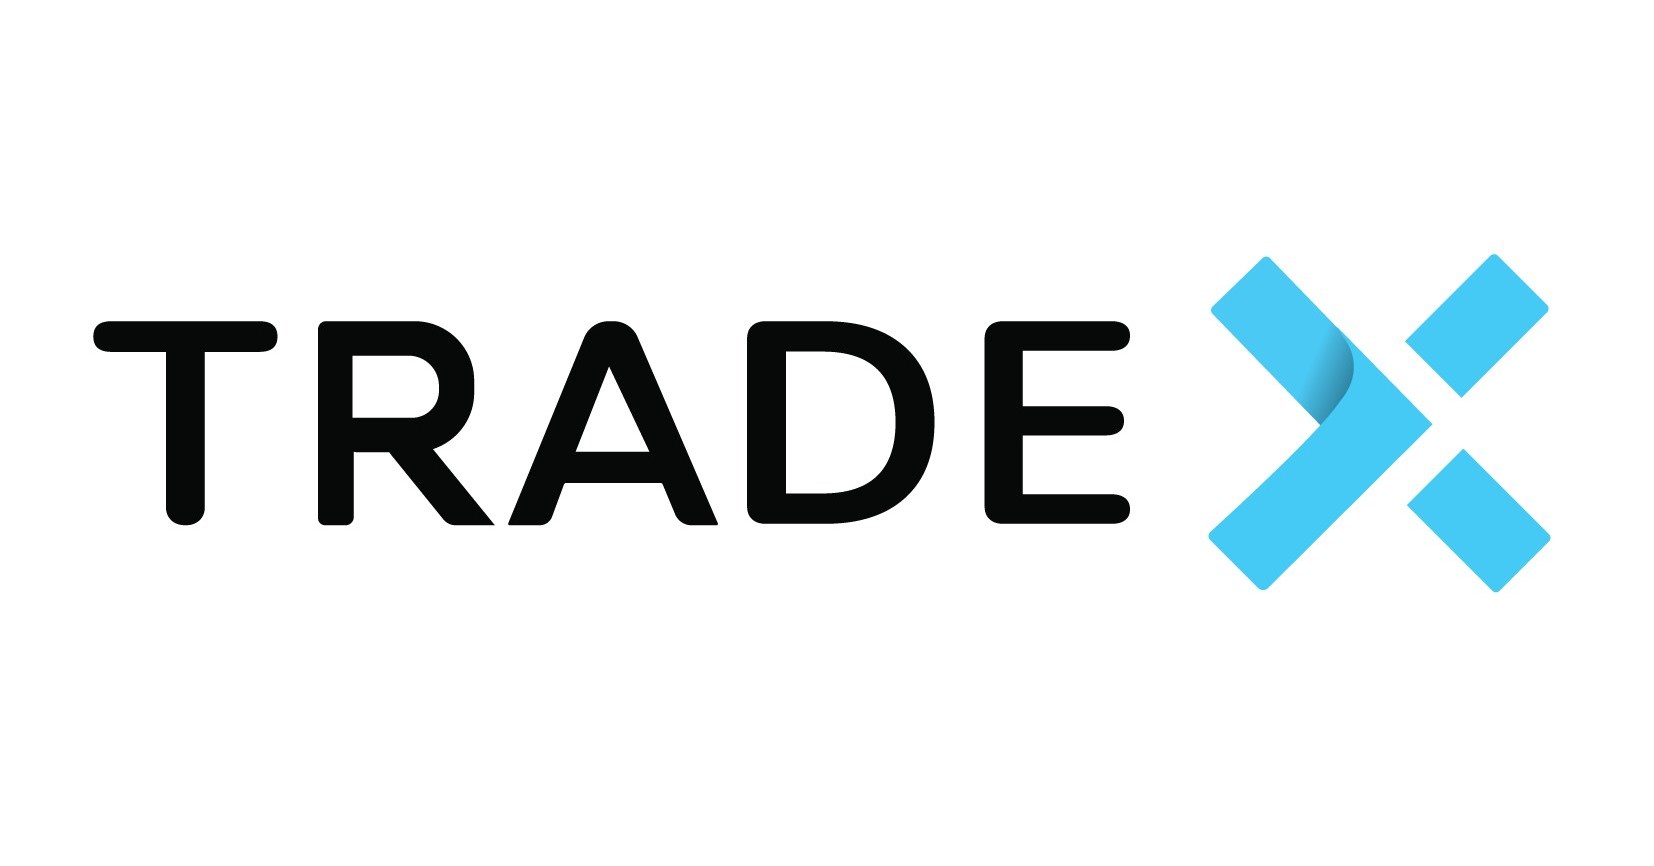 Trade X Expands Its Presence In Africa With The Opening Of A Trade Route In Ghana